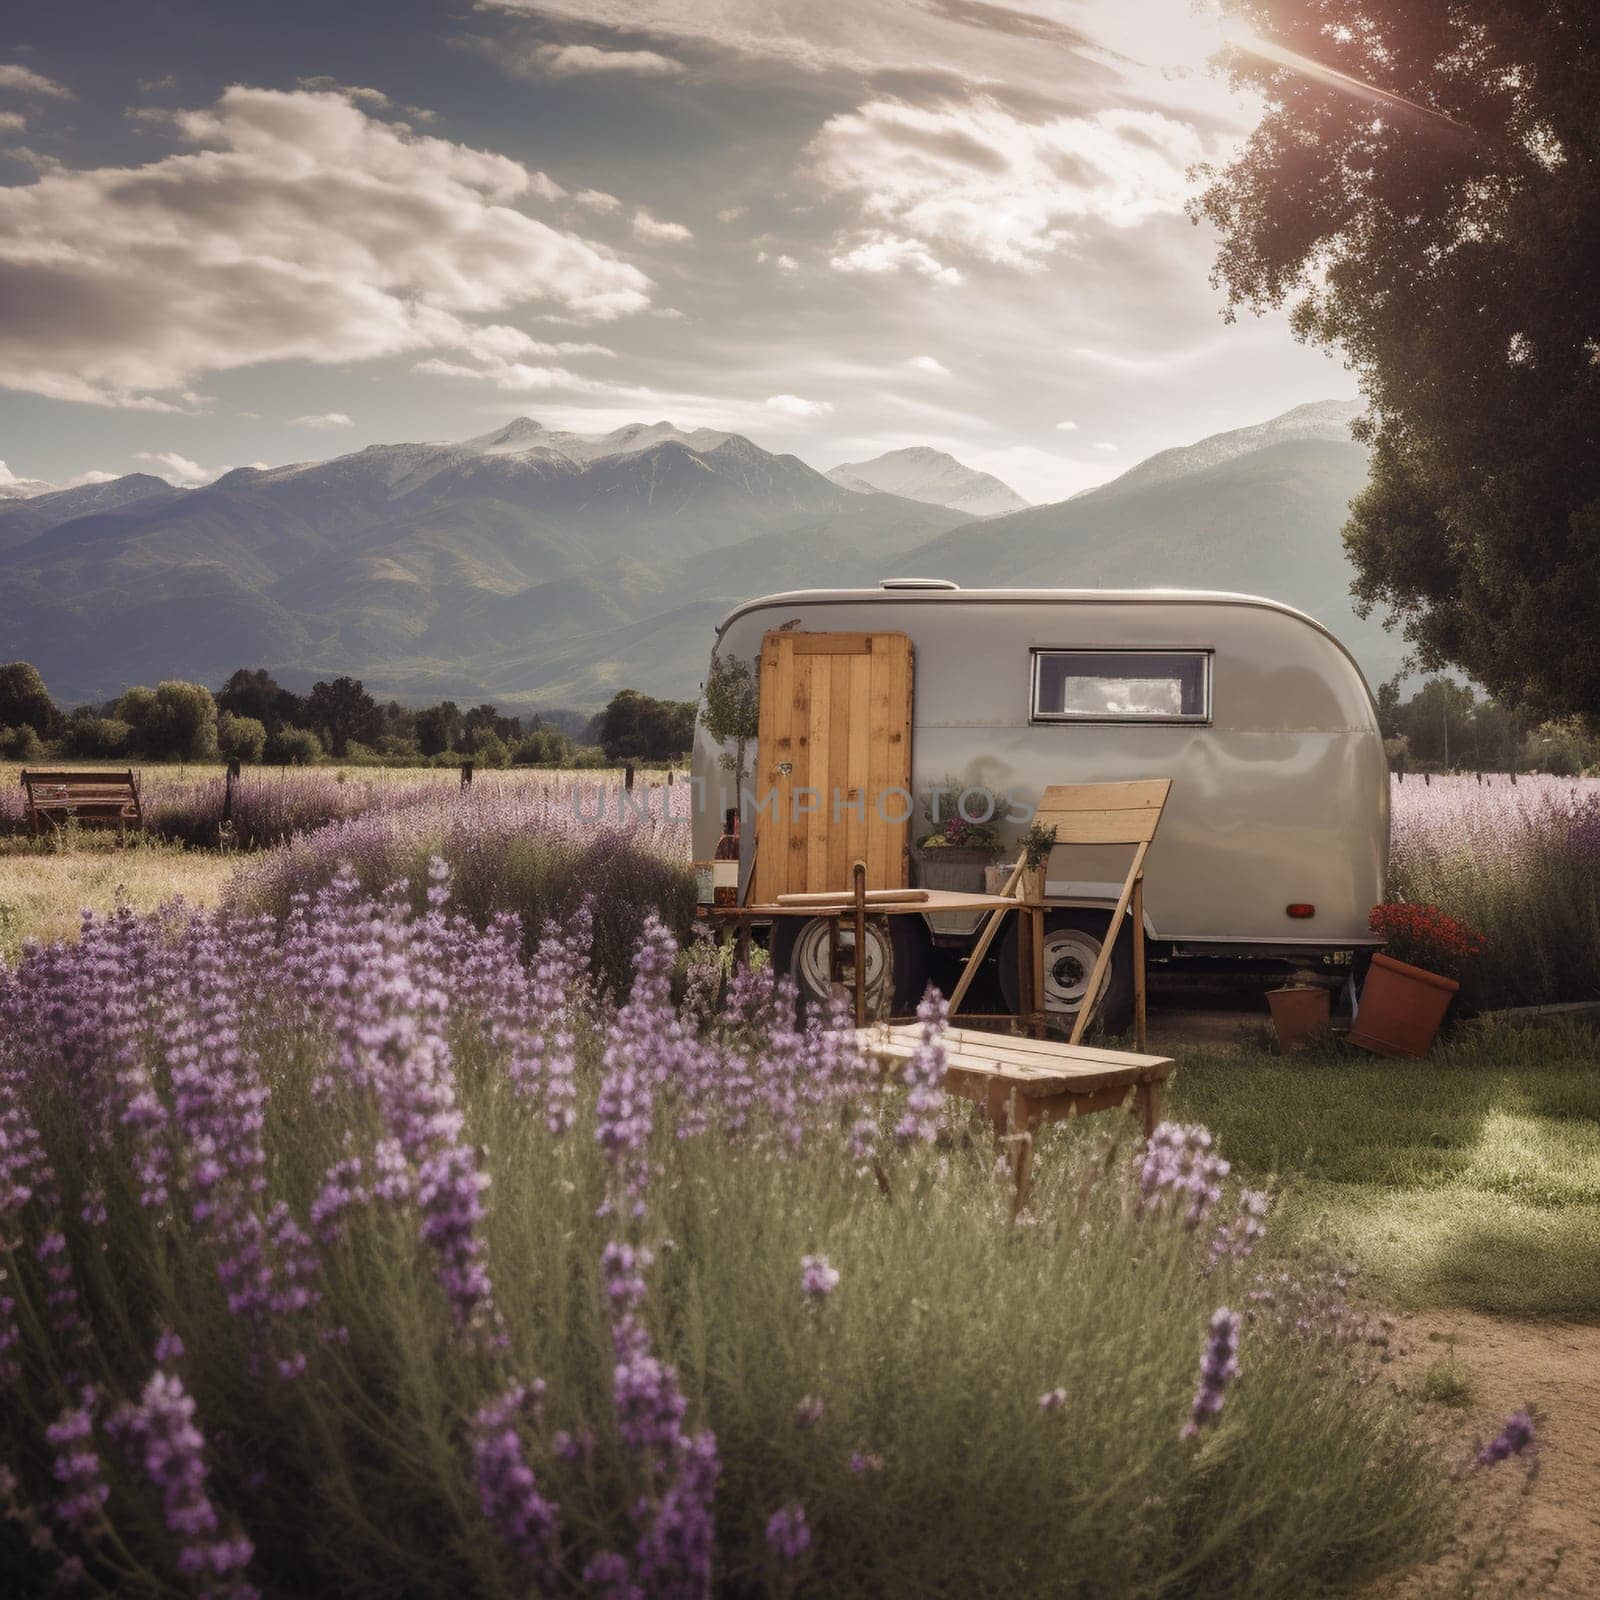 Experience the beauty of lavender with this image of a camper trailer parked in the middle of a blooming lavender field, with a quaint village and a mountain range visible in the background. The trailer's large windows provide stunning views of the lavender fields, creating a peaceful and relaxing atmosphere. A small wooden table and chairs are set up outside the trailer, offering a spot to enjoy a meal with a view, admiring the beauty of the fields and the surrounding landscape. This is the perfect location for a tranquil and romantic getaway, and a memorable experience in nature.